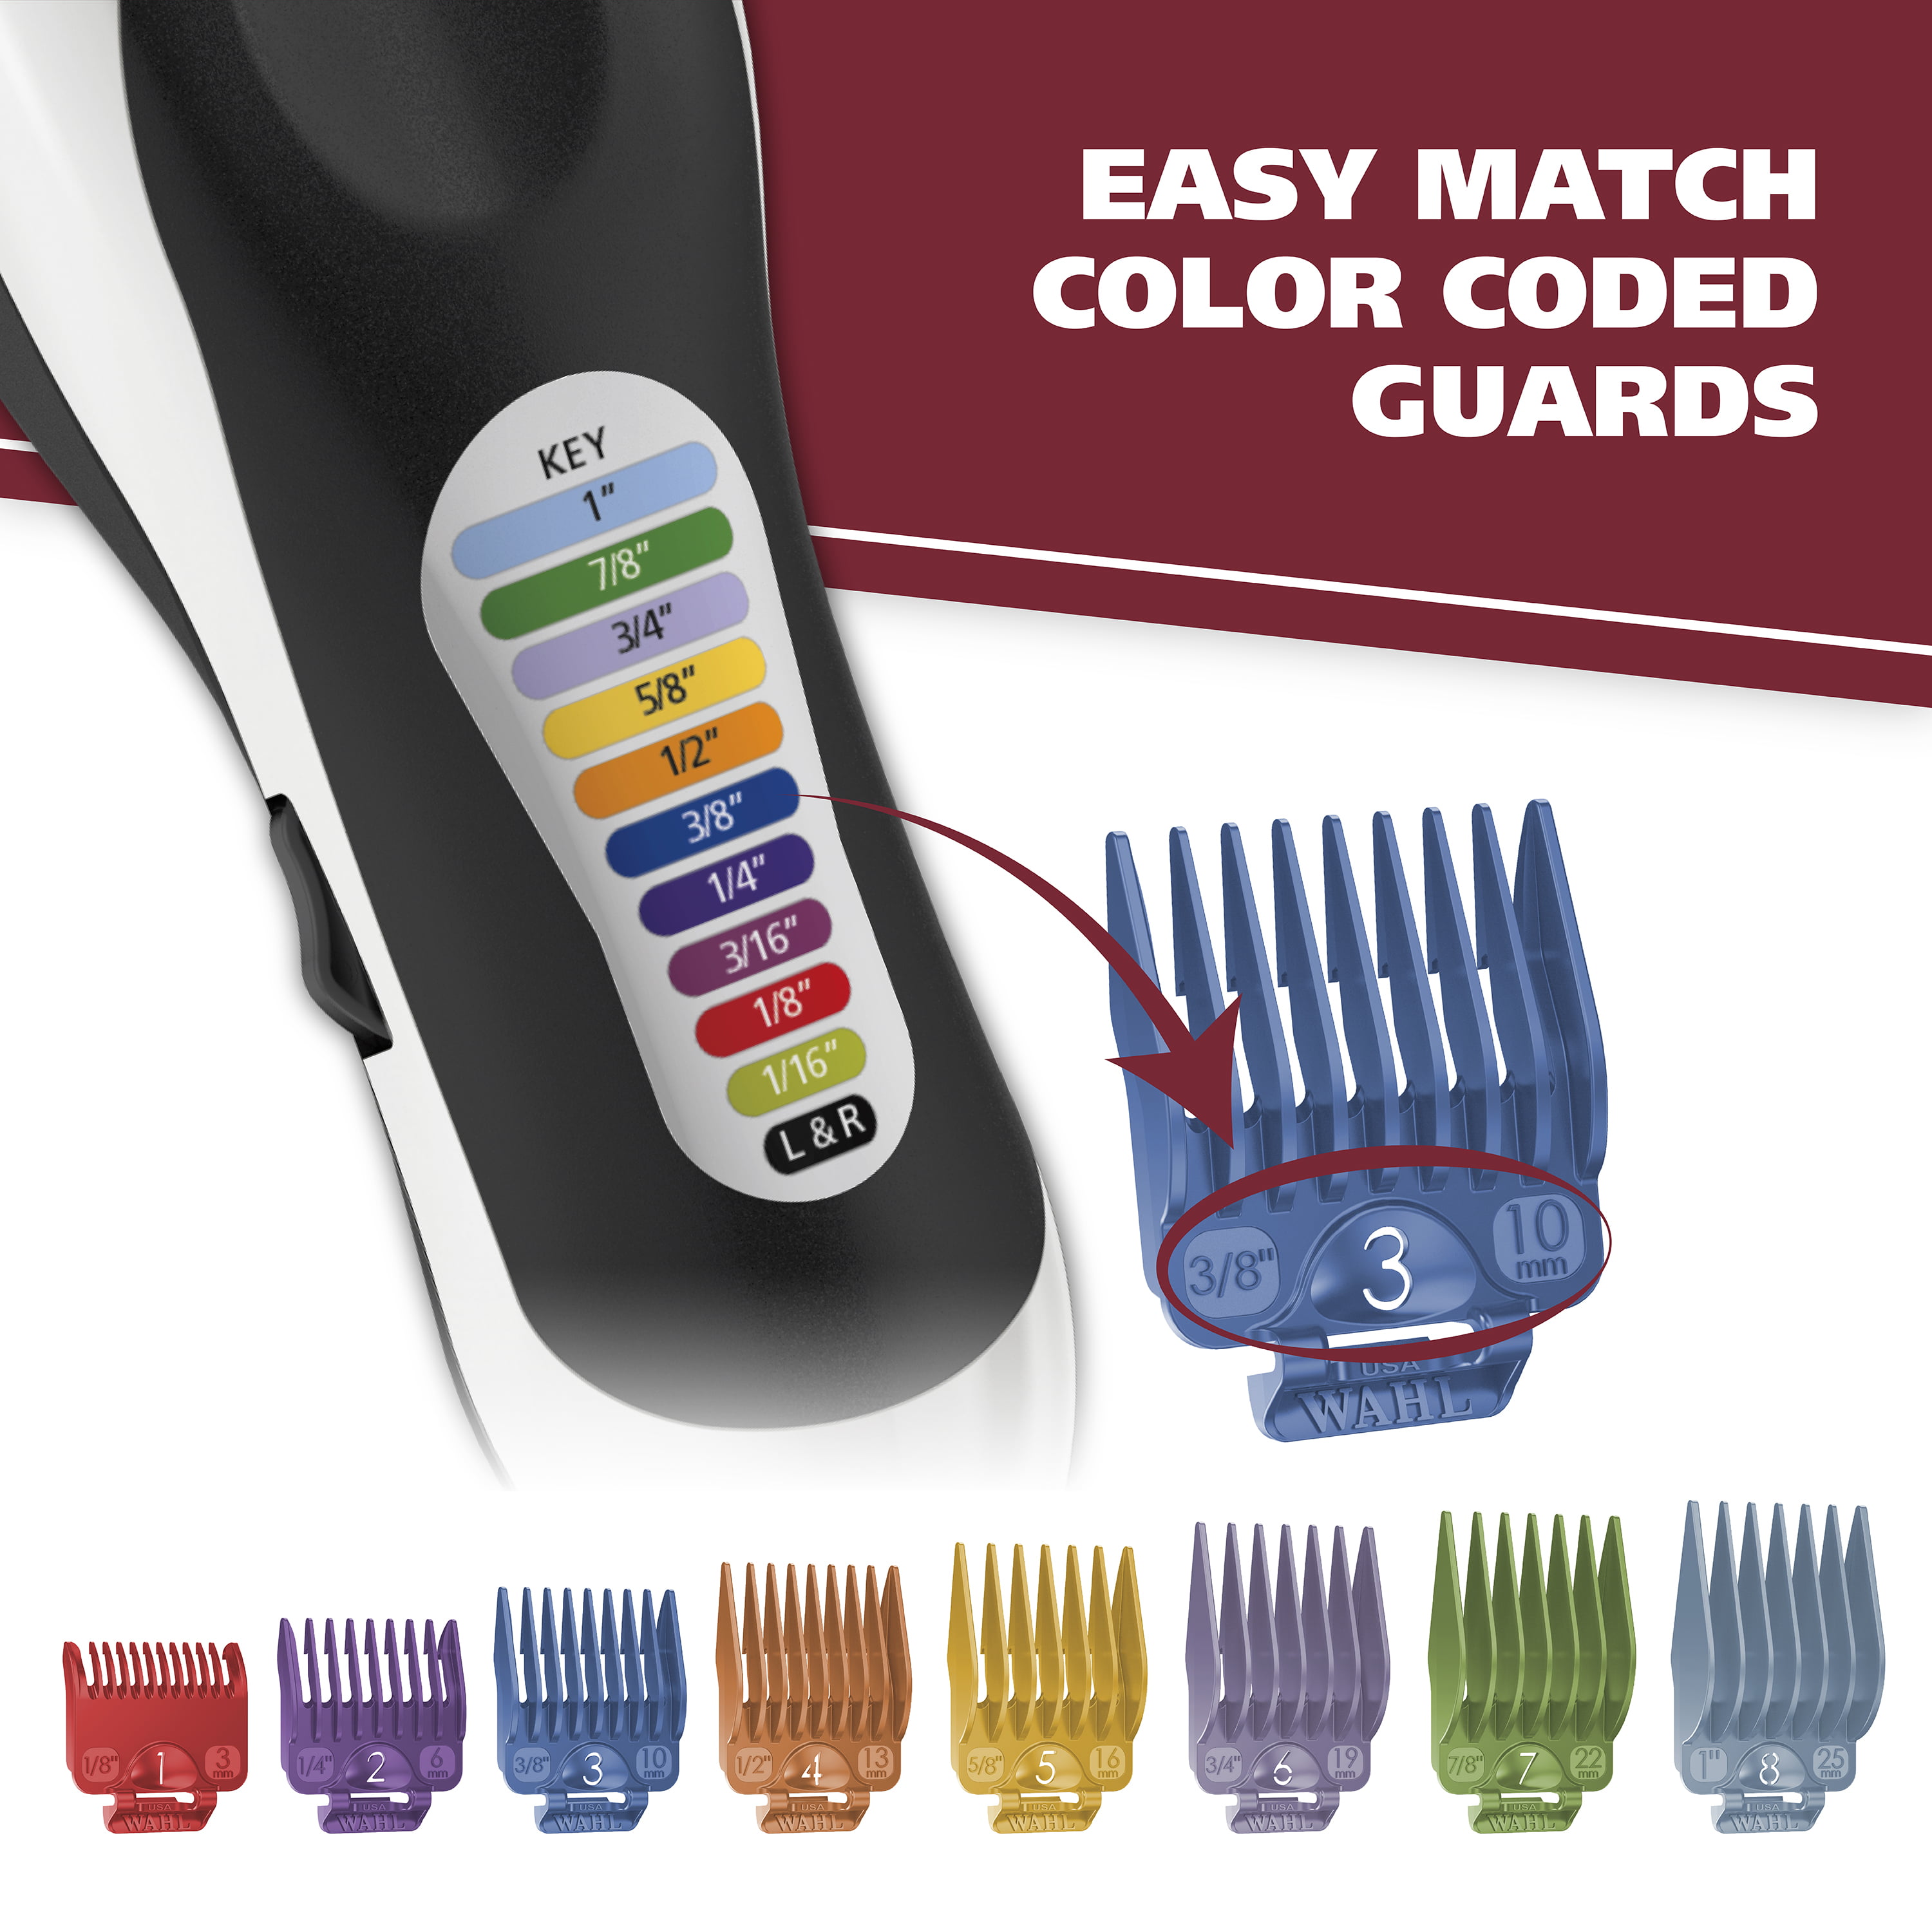 wahl color pro complete haircutting kit